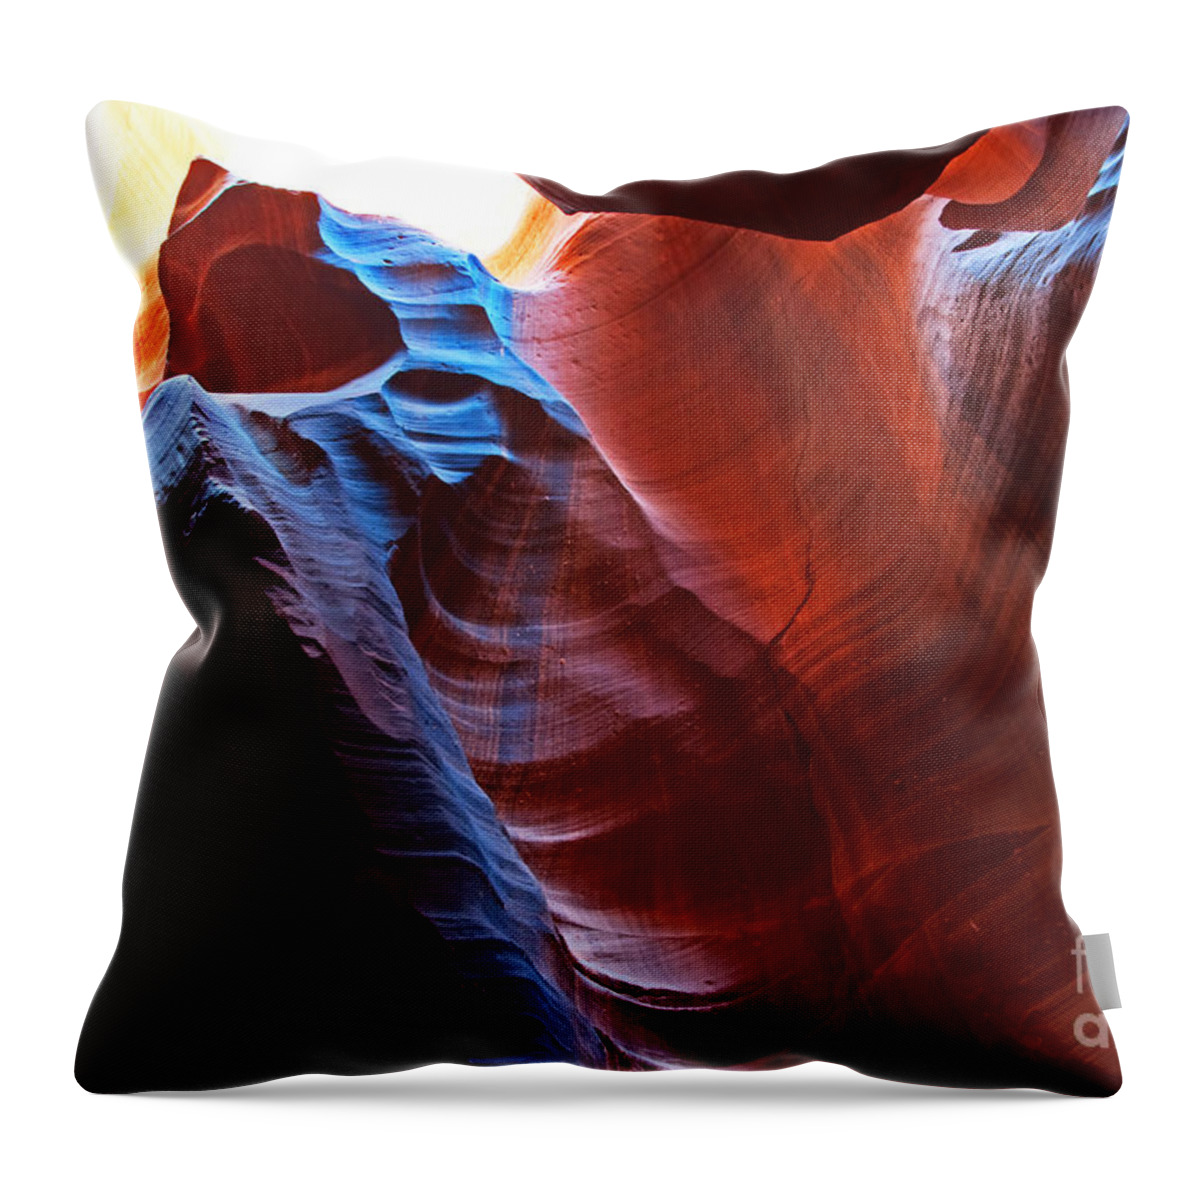 Arizona Throw Pillow featuring the photograph The Bear 2 by Bob and Nancy Kendrick